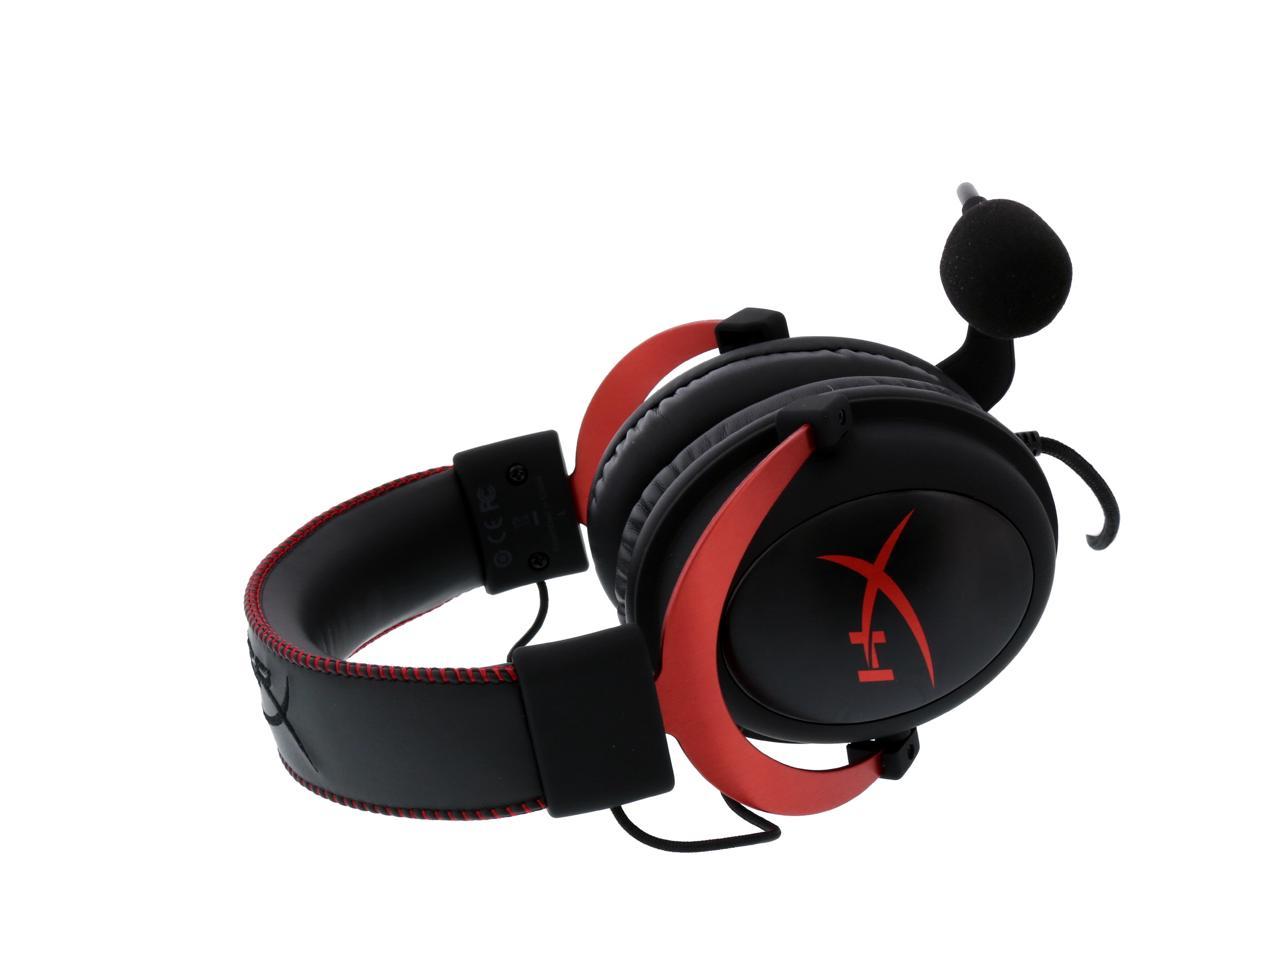 veer Glimlach Er is behoefte aan HyperX Cloud II Gaming Headset with 7.1 Virtual Surround Sound - Red -  Newegg.com